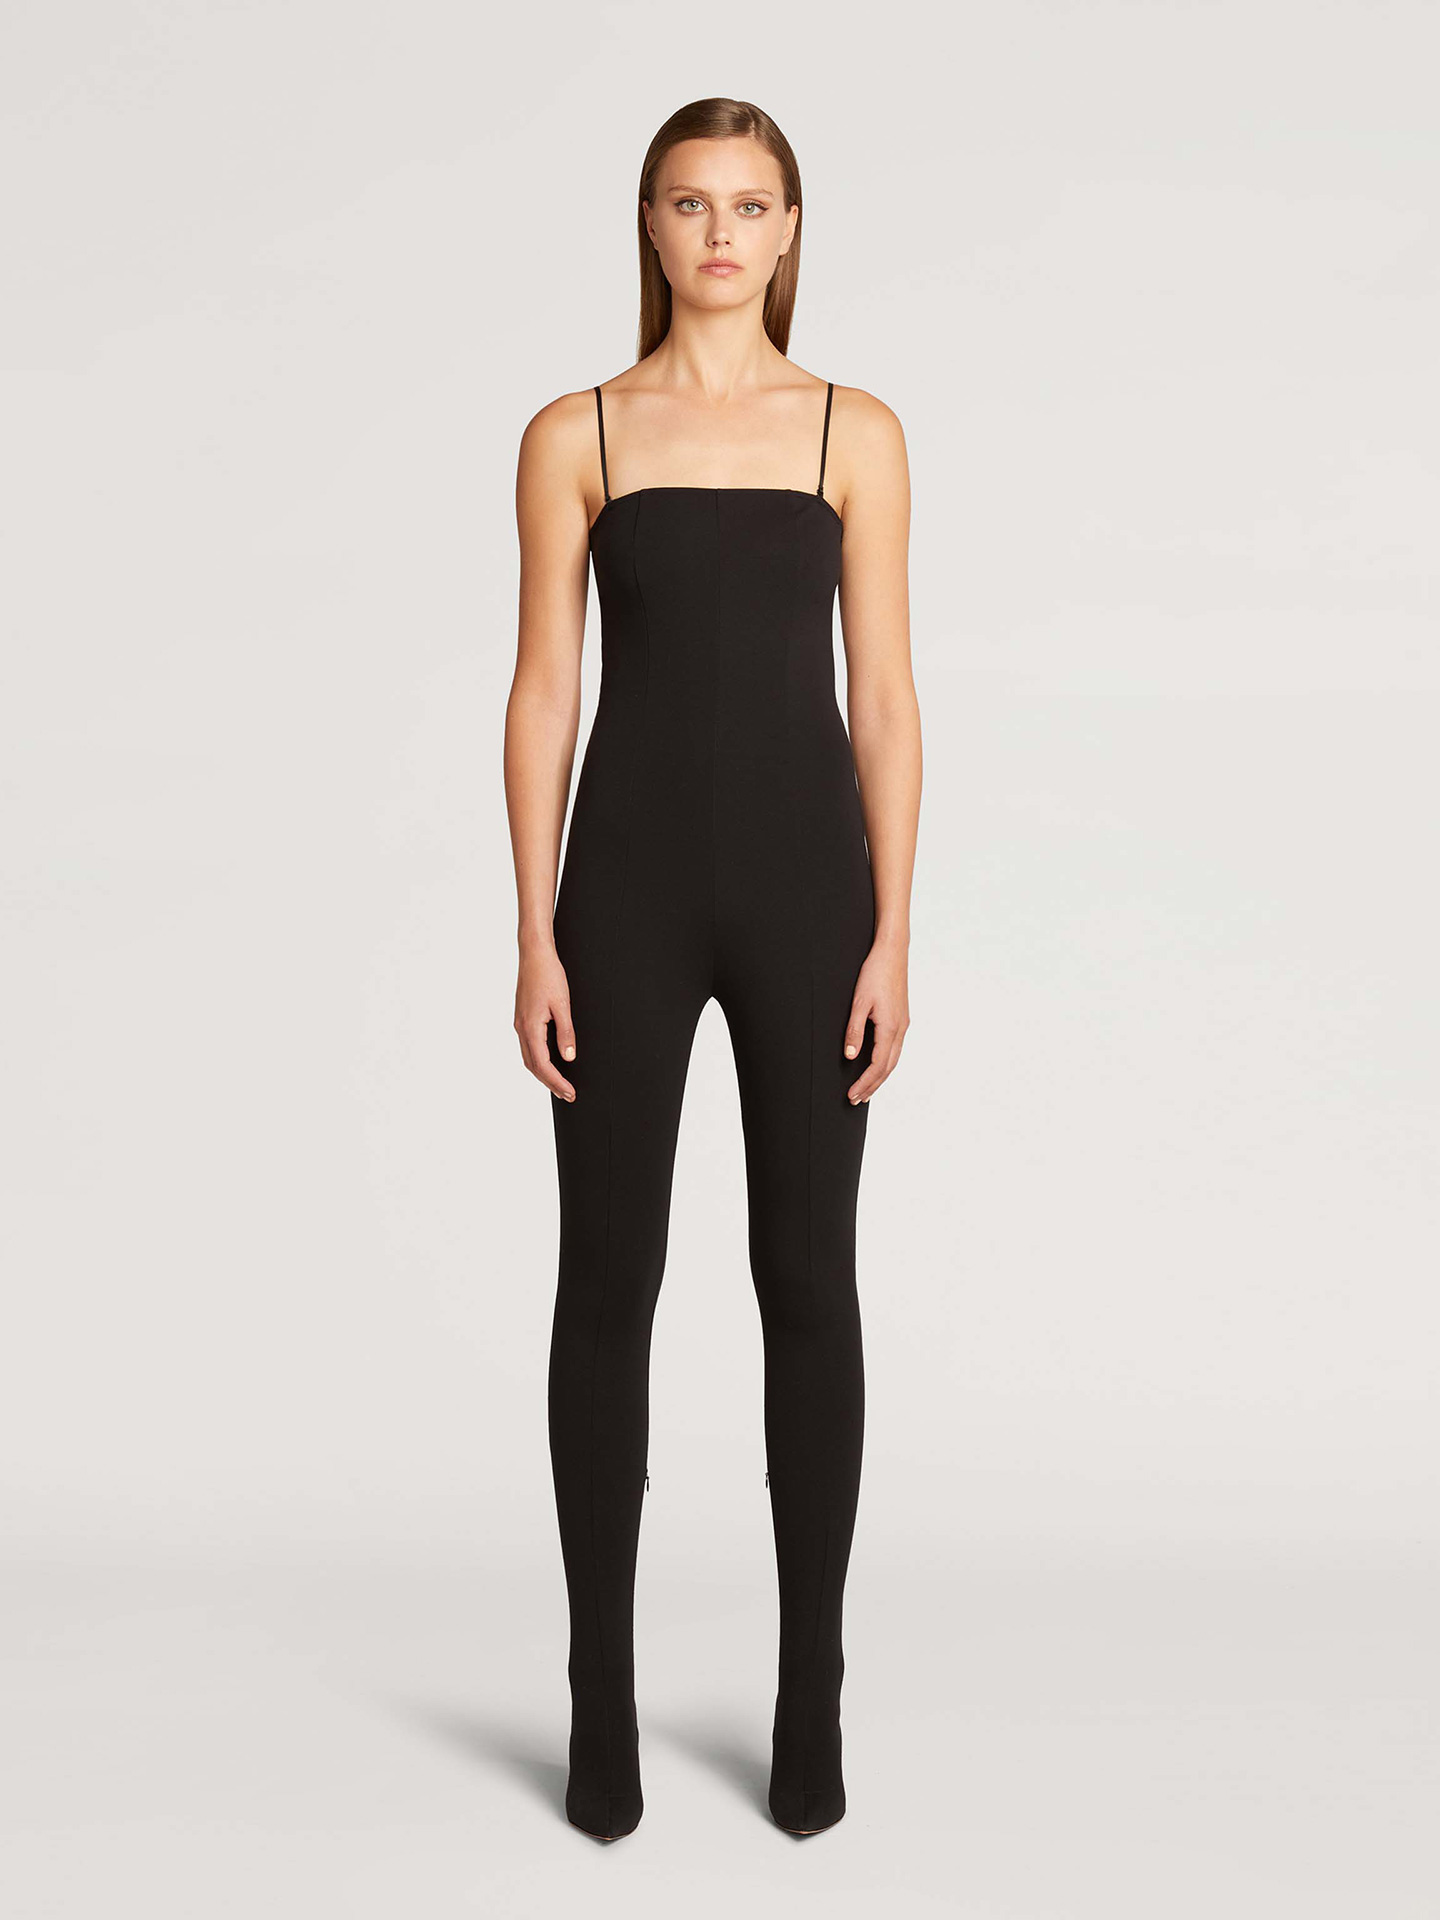 Wolford - Catsuit with shoes, Frau, black, Größe: M42 von Wolford